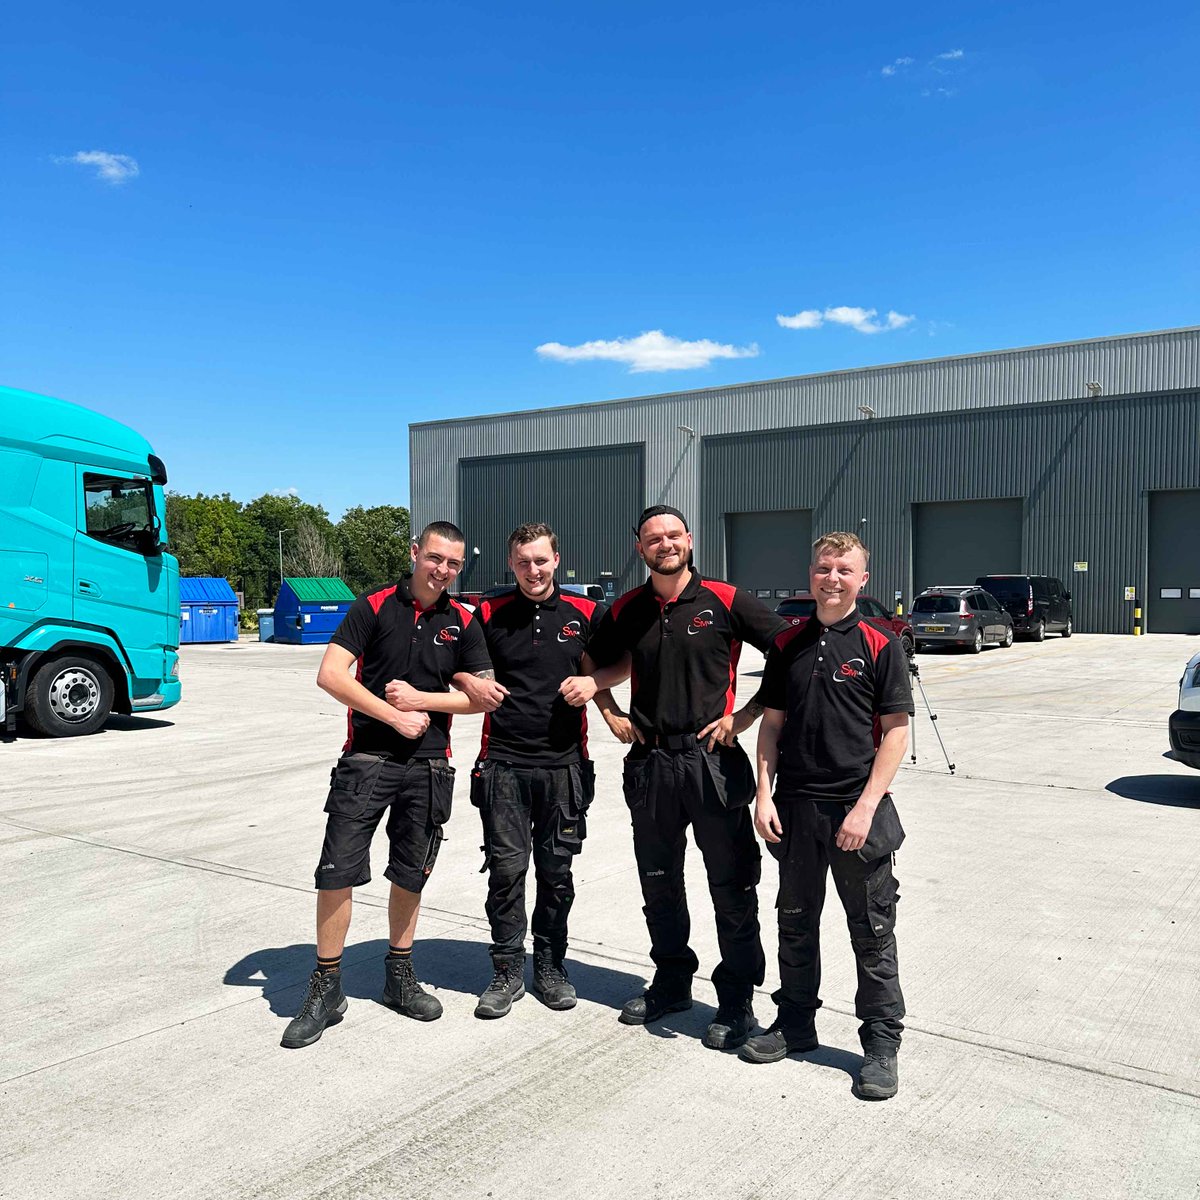 If you want to join our vibrant team of engineers and learn from the best - SM UK is the place for you! 
We have vacancies for Truck and Van Engineers (including Trainee positions).

Apply on our website
smuk.co.uk/jobs

#Jobs #EngineerJobs #JobVacancies #Engineering #Job